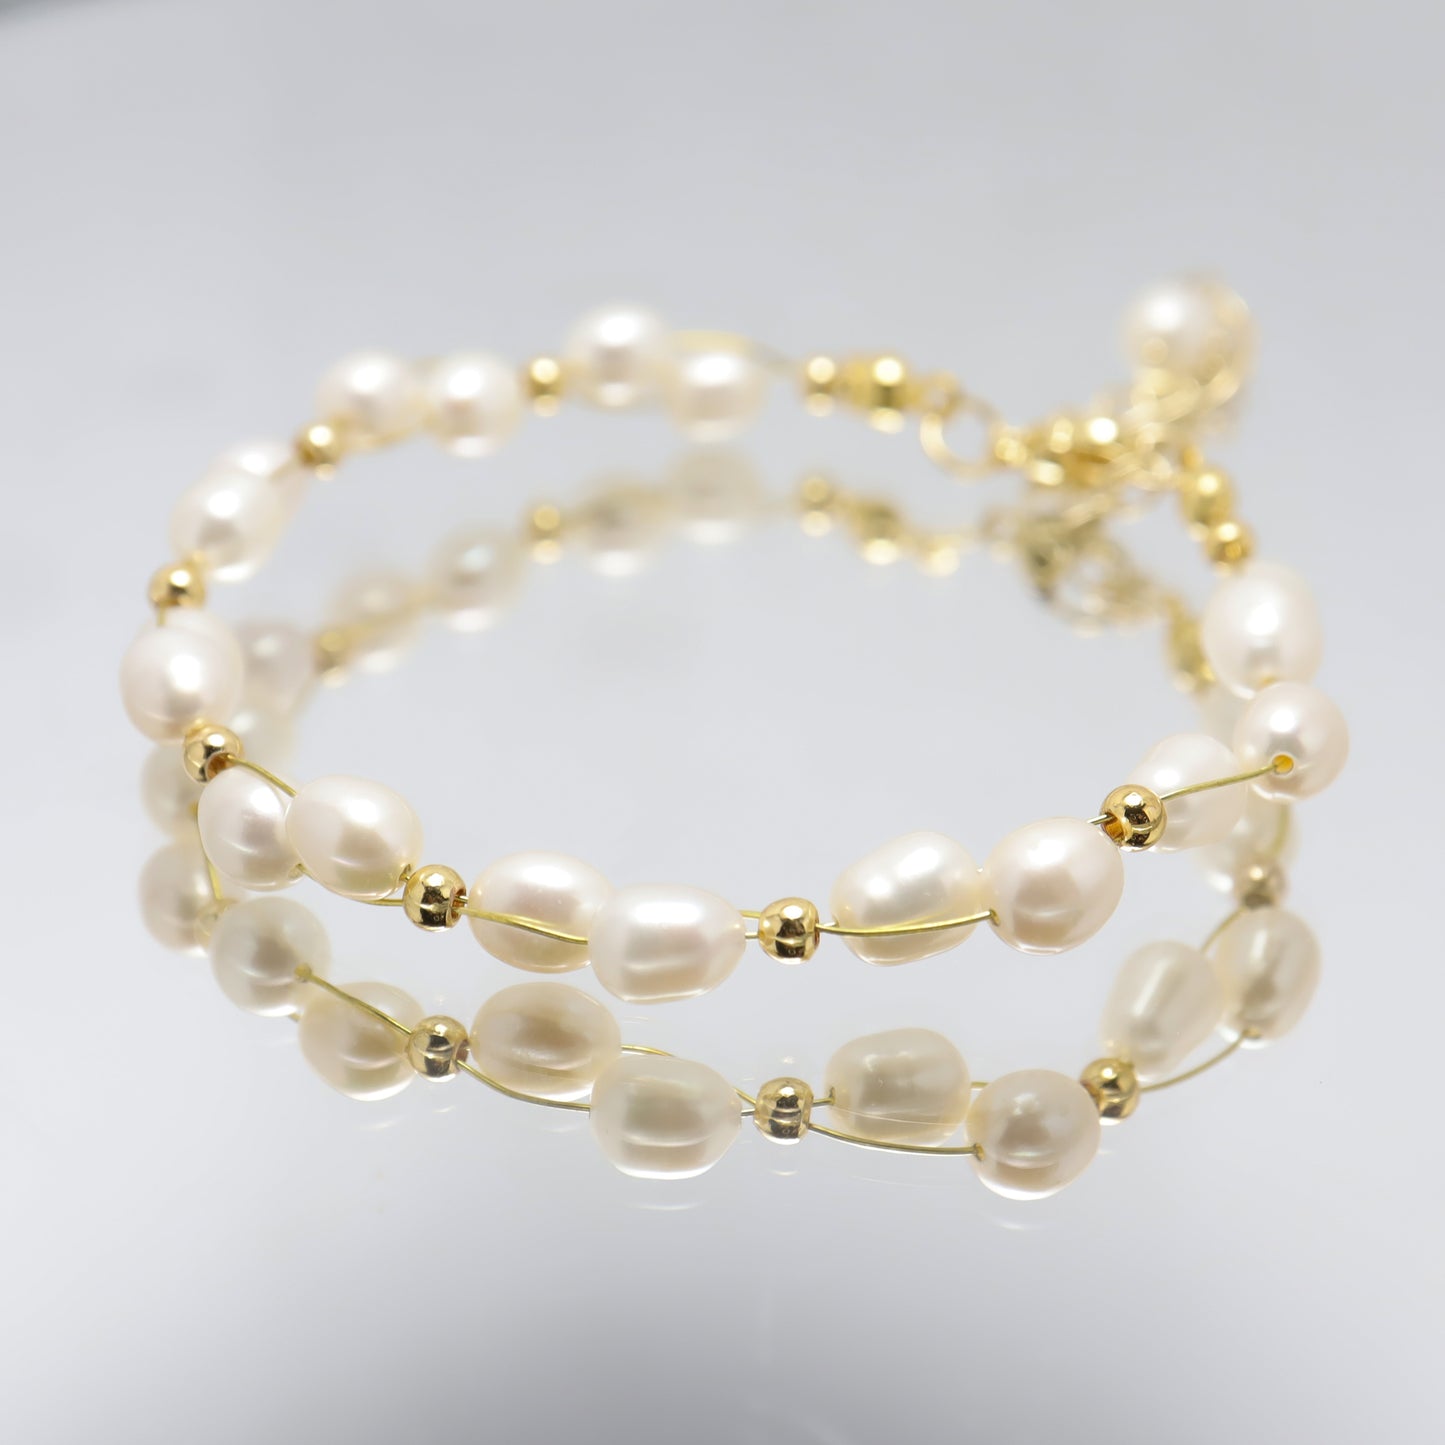 Blooming Galaxy - Elegant Freshwater Pearl Bracelet With Adjustable Chain